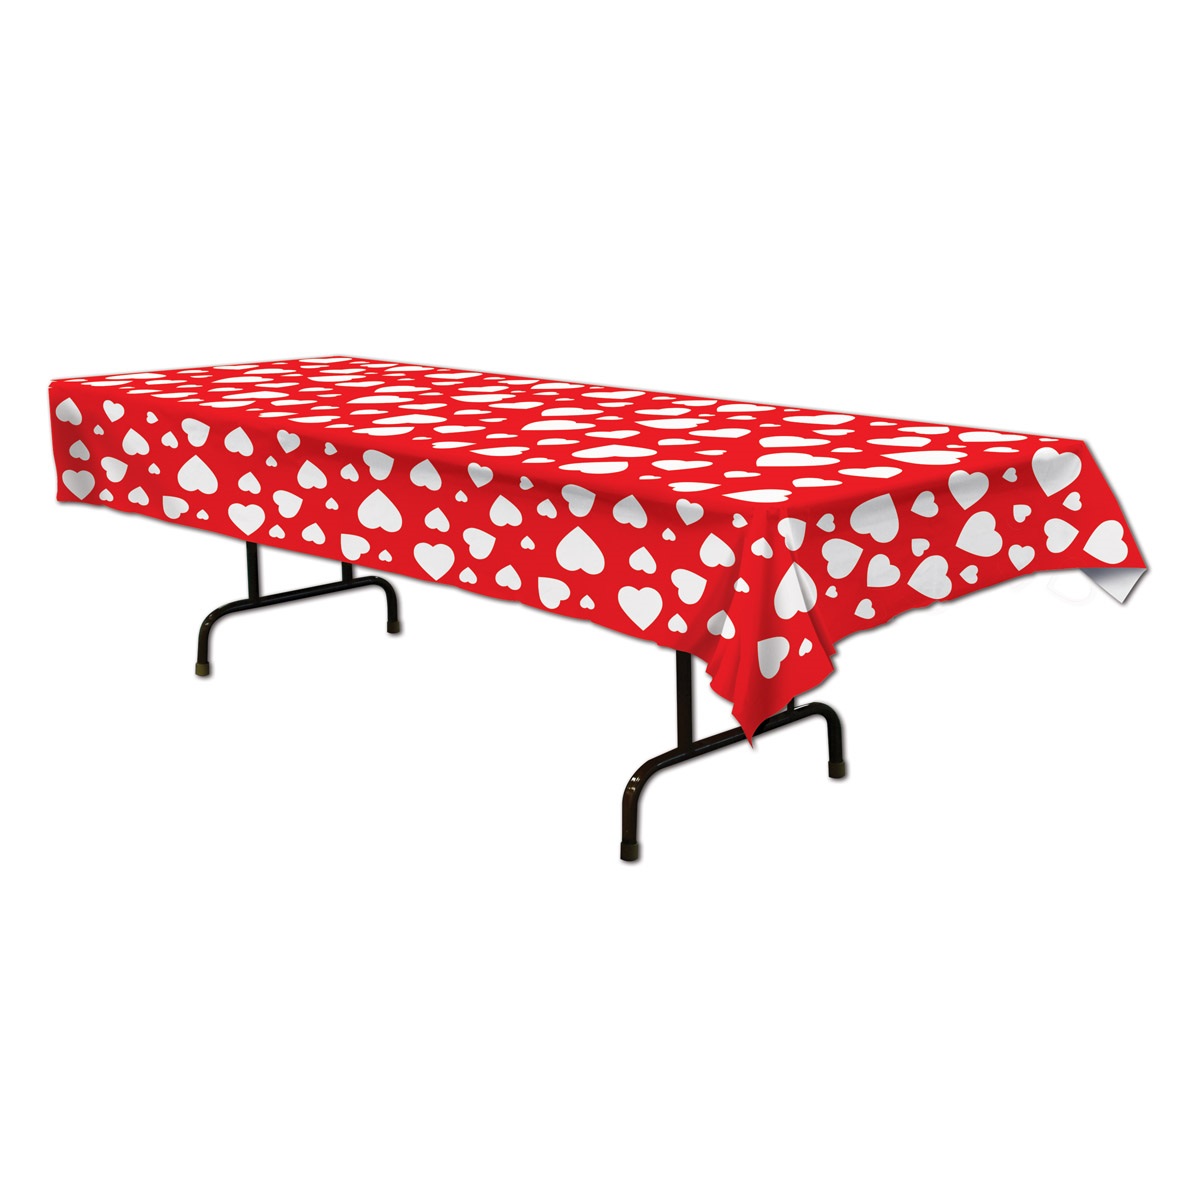 Party Central Club Pack of 12 Red and White Heart Table Cover Valentines Day Decorations 54" x 108"